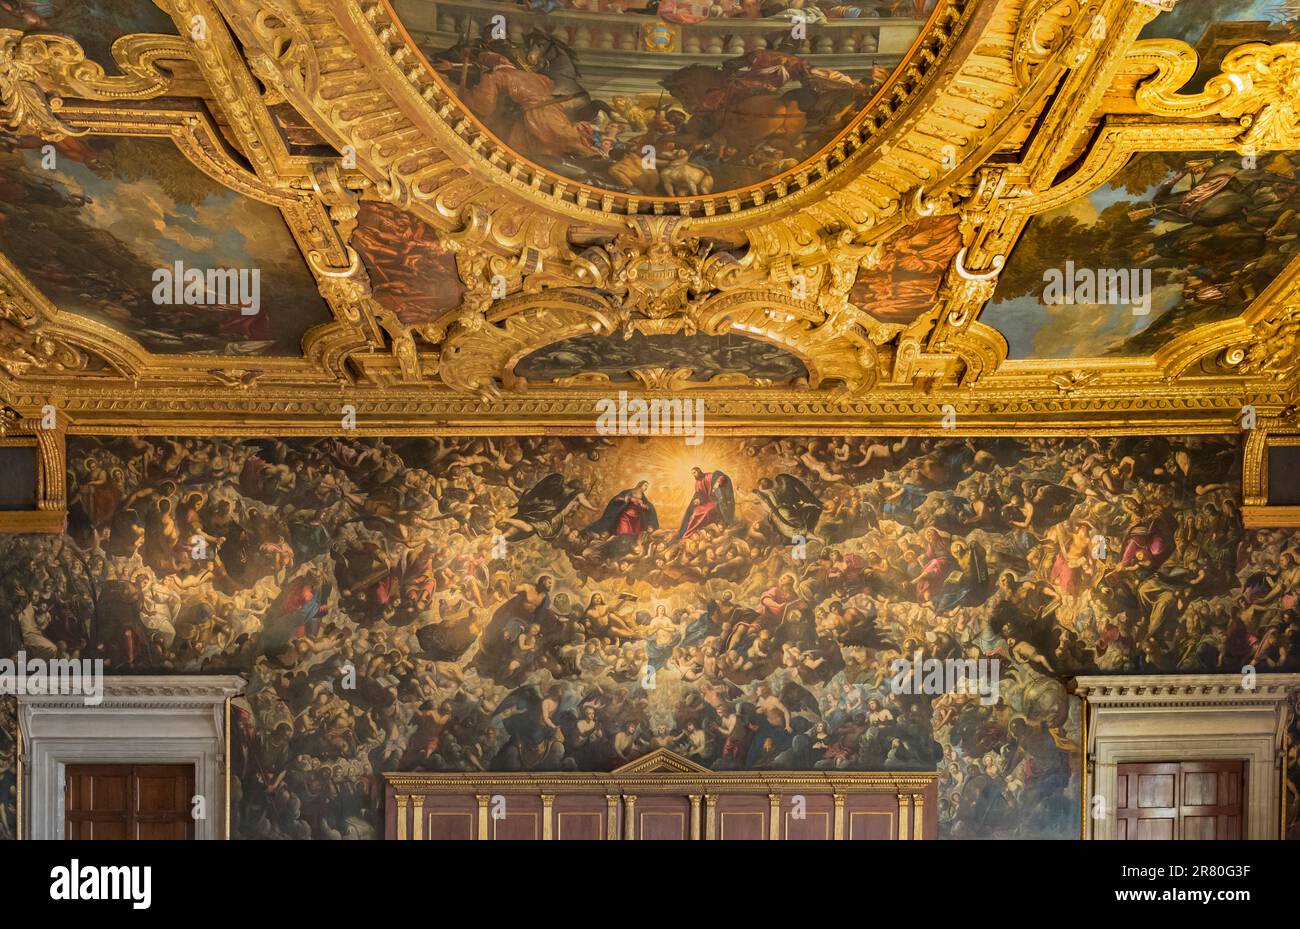 Venice, Italy. Il Paradiso, or Paradise. Oil painting by Tintoretto in the Chamber of the Great Council in the Palazzo Ducale, or Doge’s Palace.  The Stock Photo